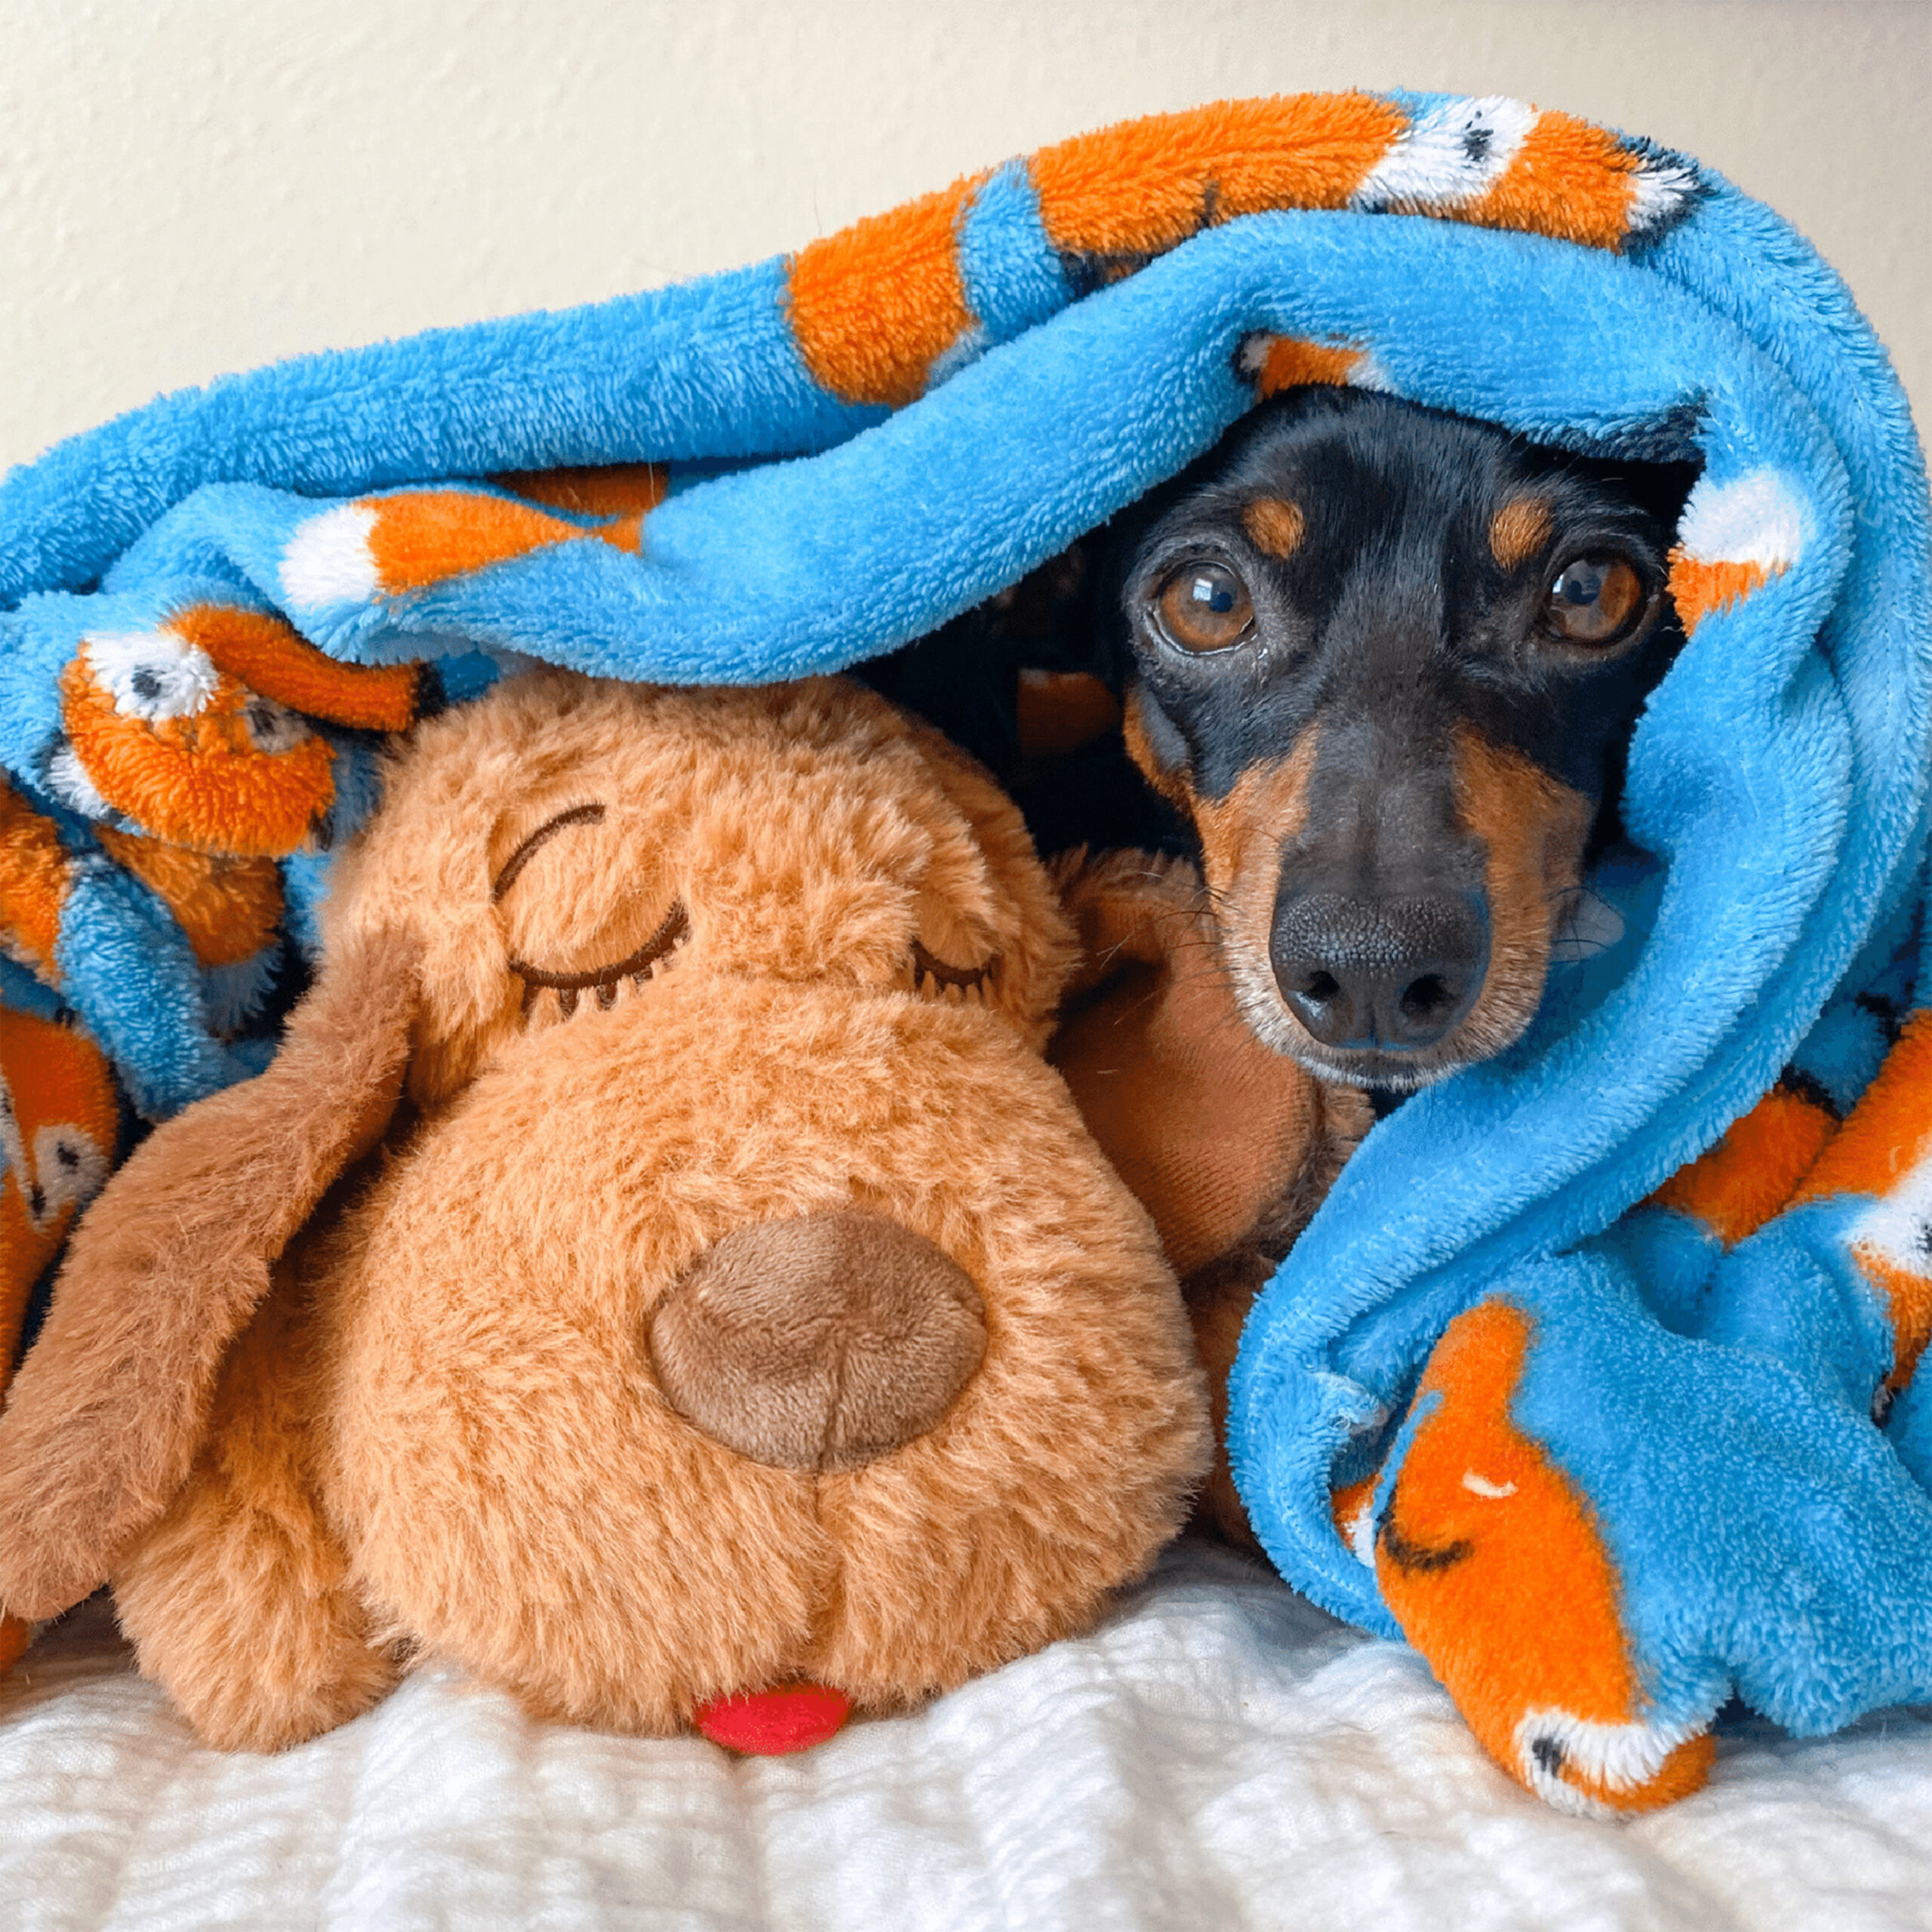 Best Separation Anxiety Dog Toys According to Pet Parents Like You